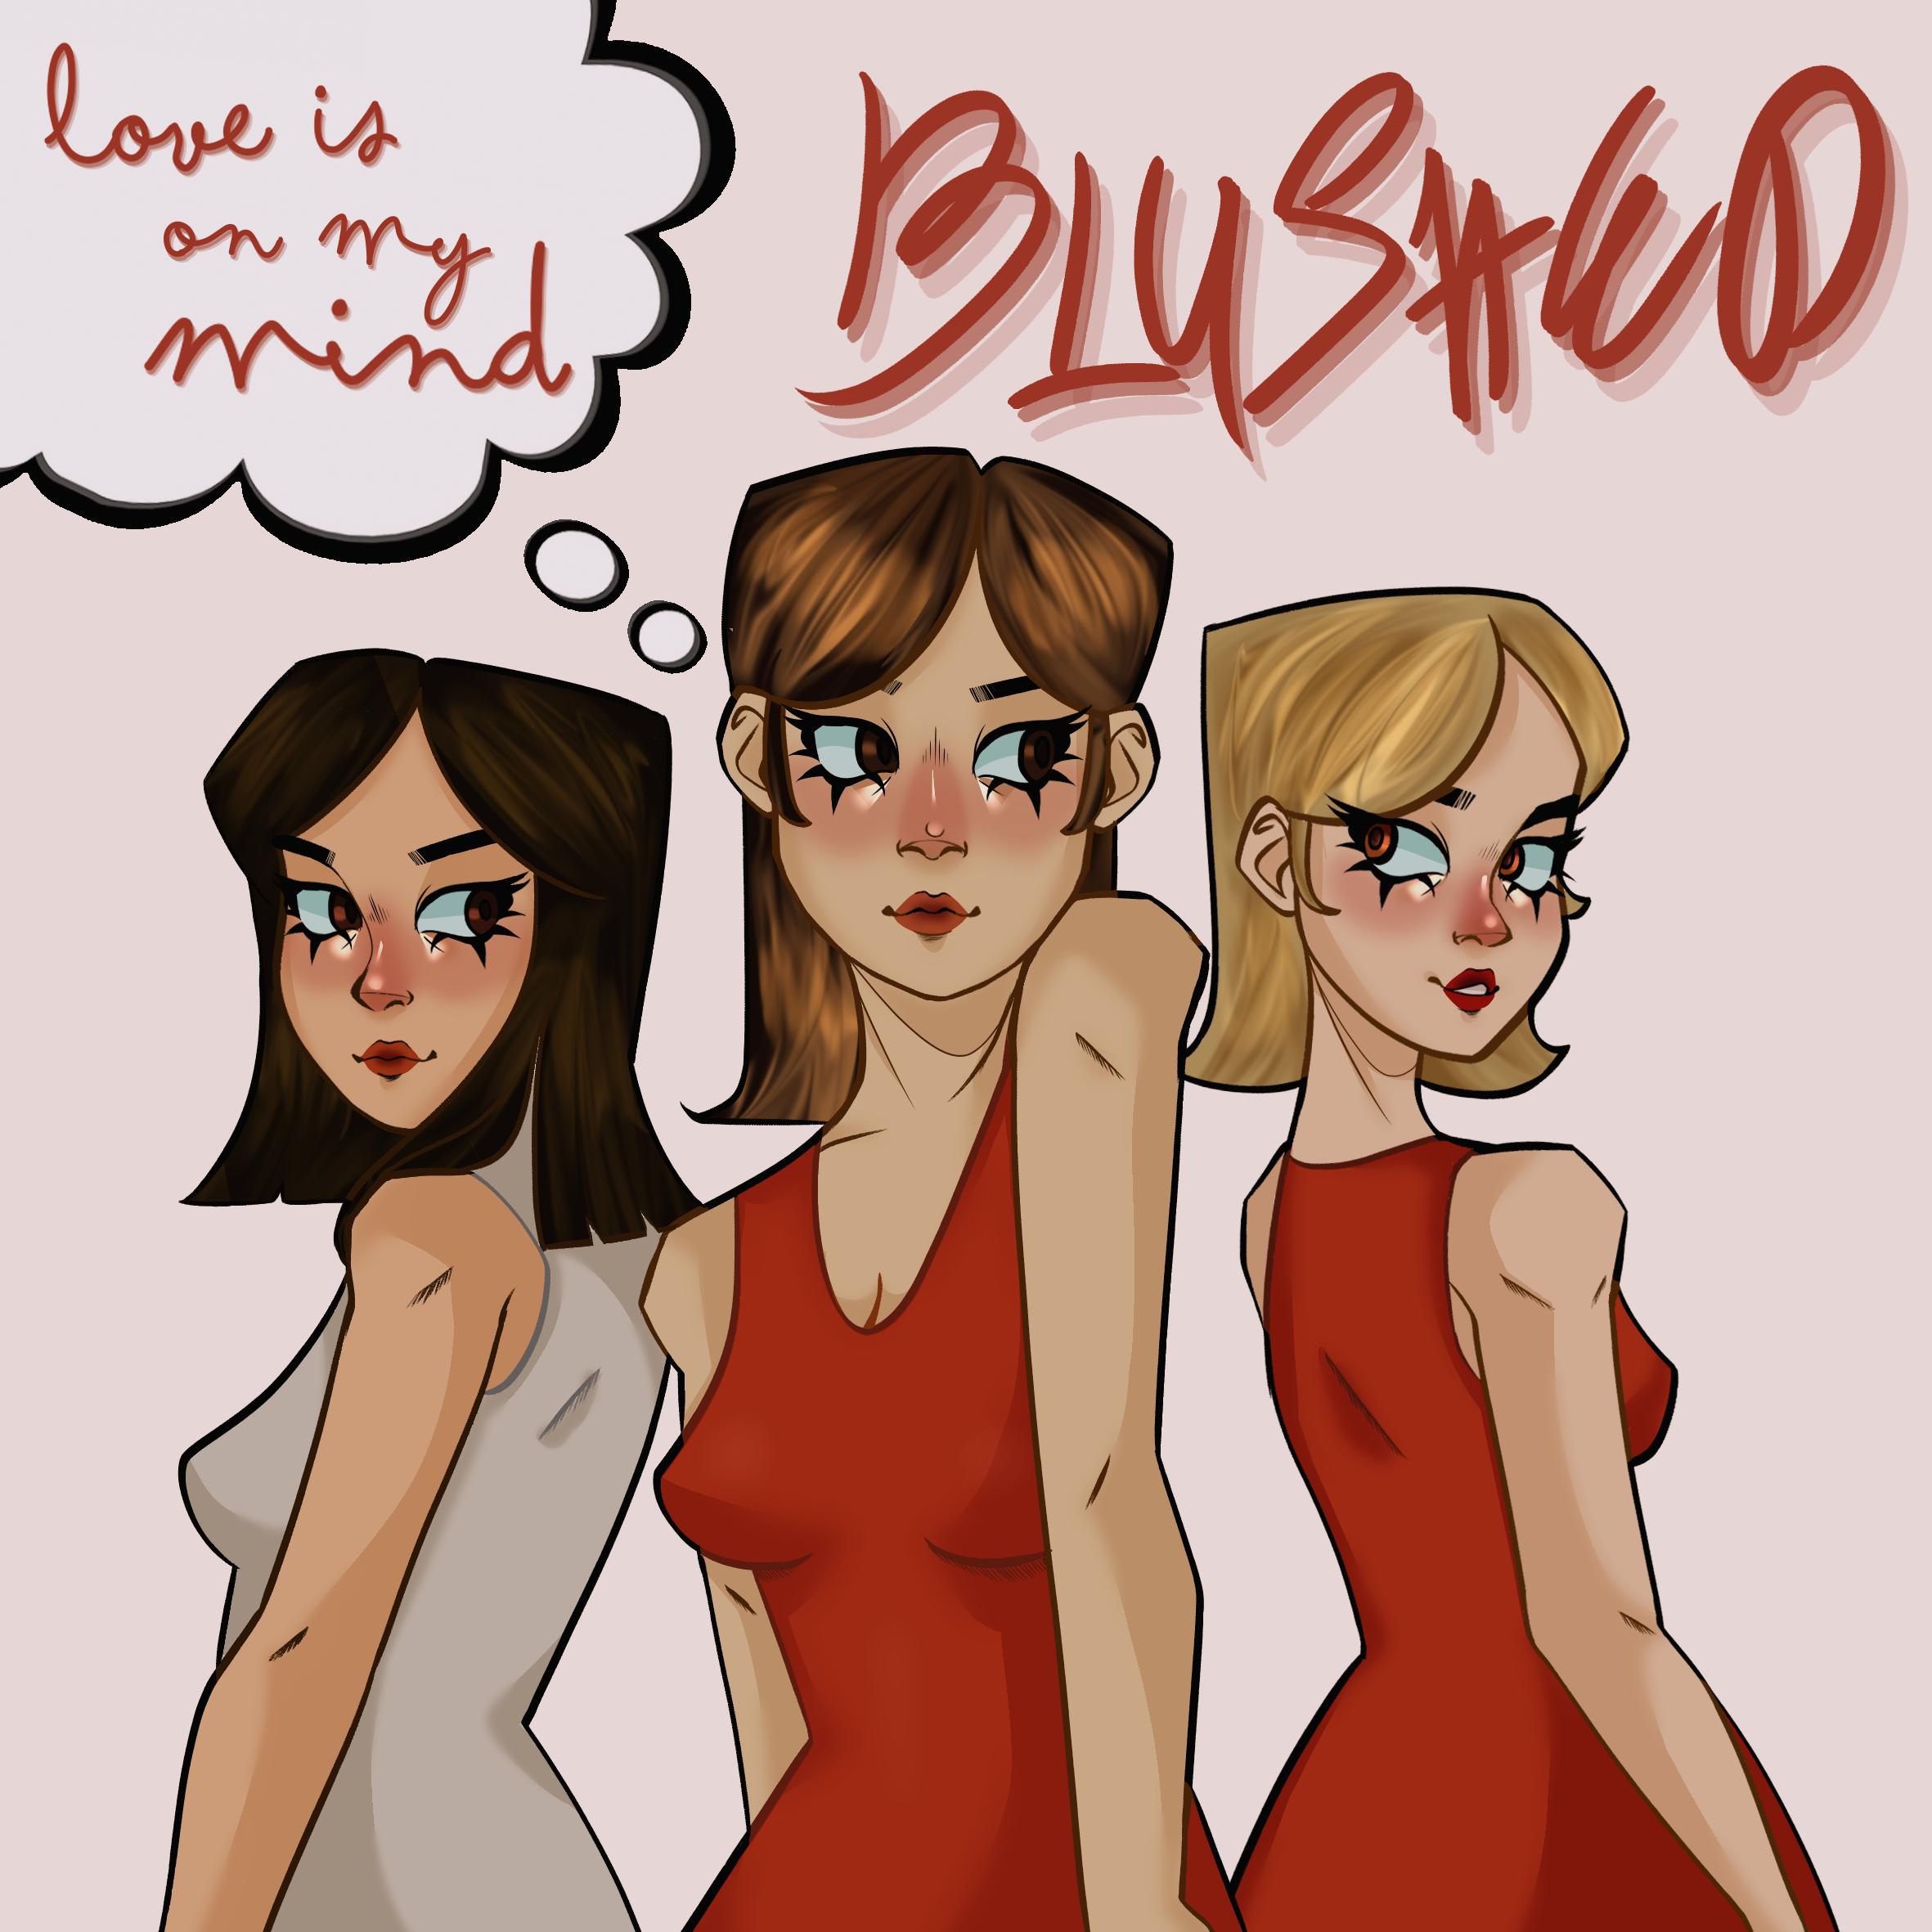 Blushed EP 'Love Is On My Mind'